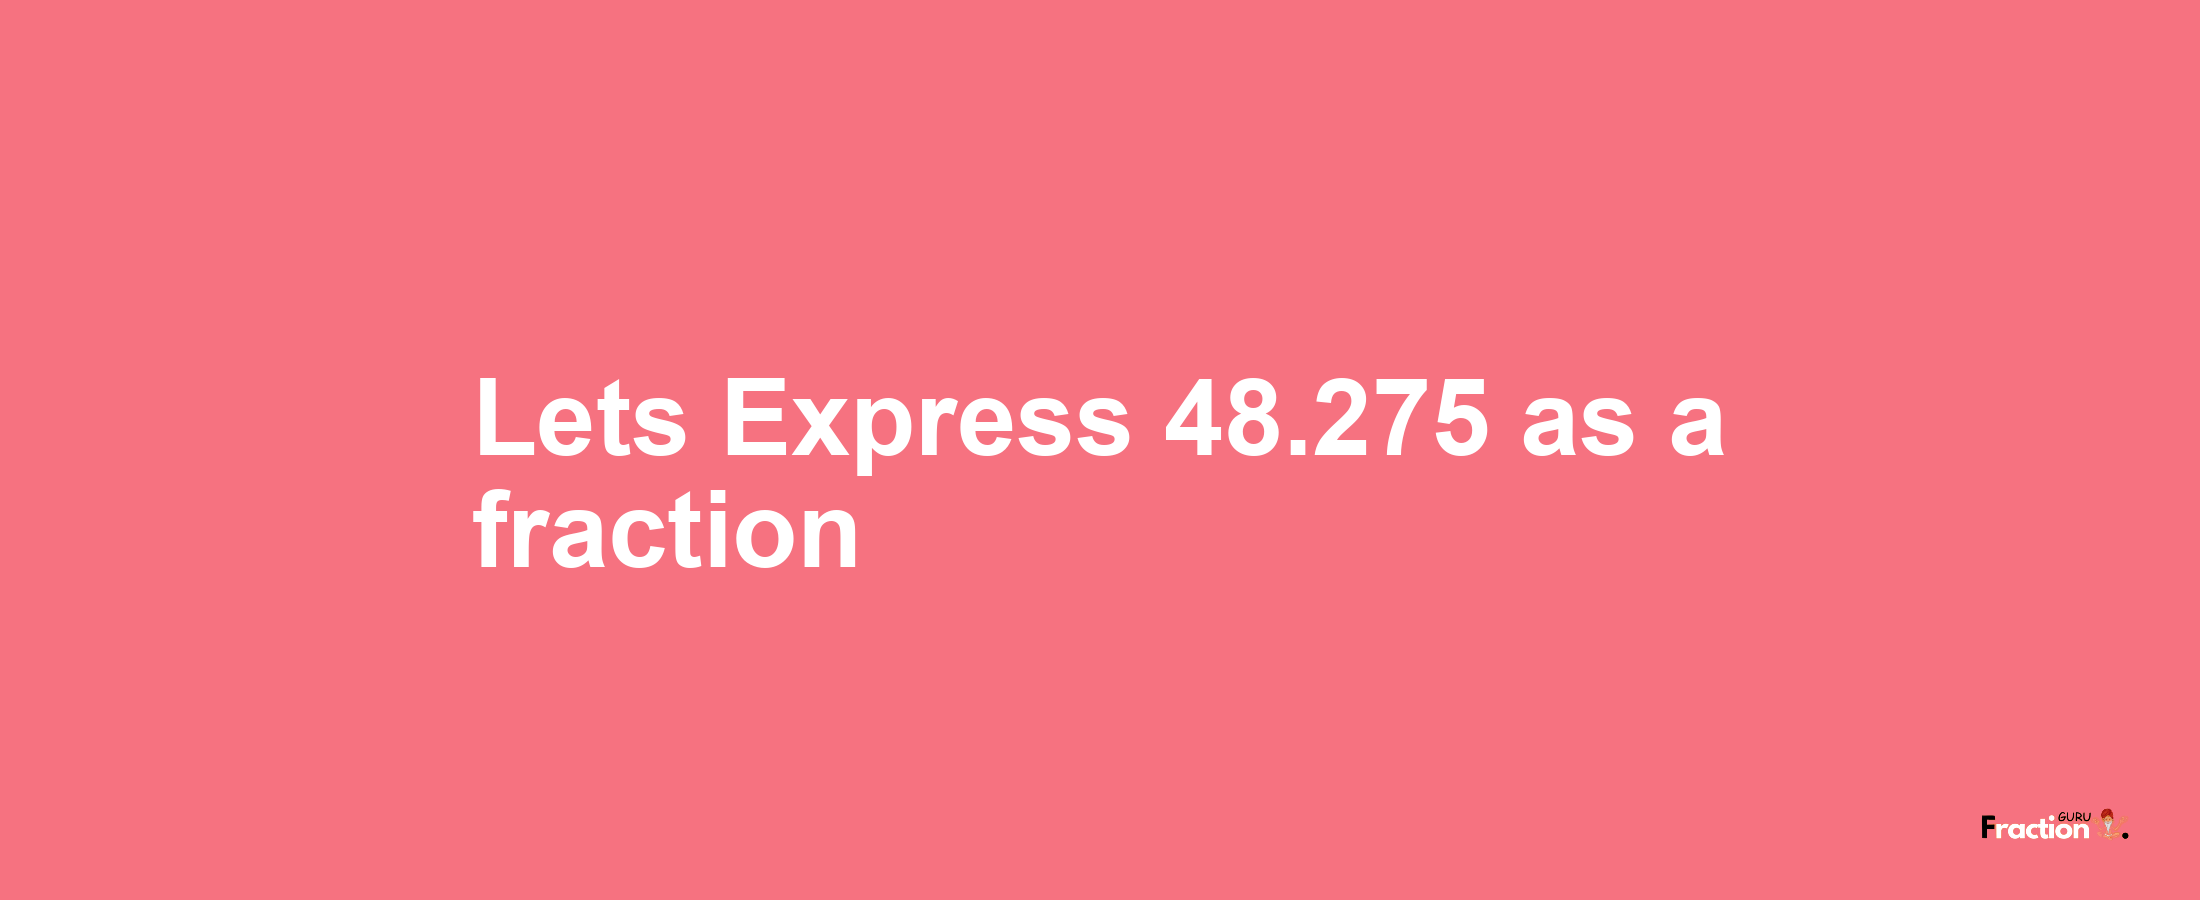 Lets Express 48.275 as afraction